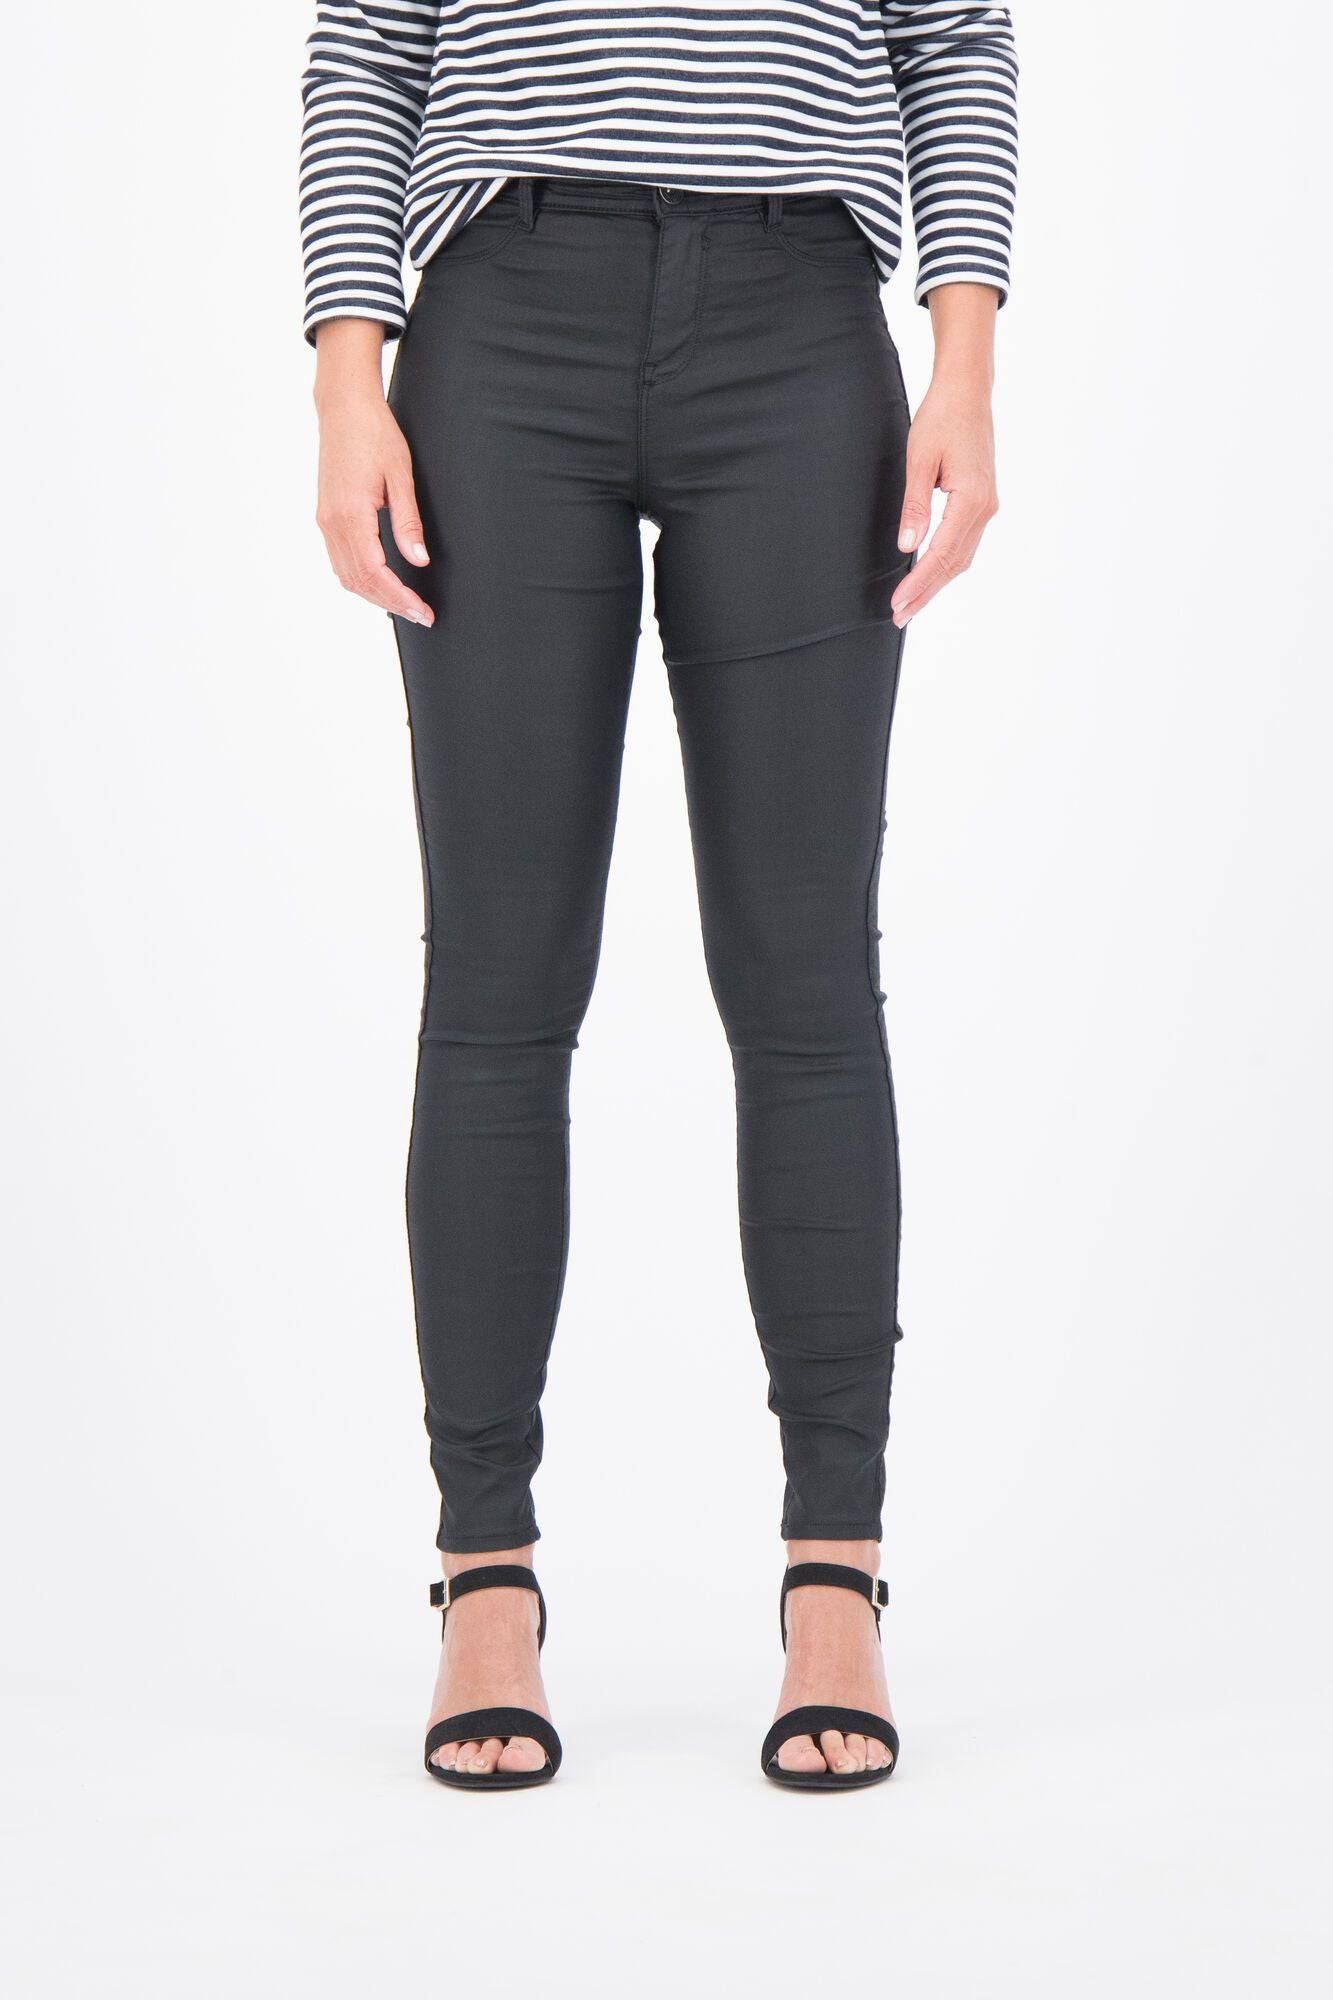 Garcia Skinny Shelter Black Coated Jeans - Your Style Your Story